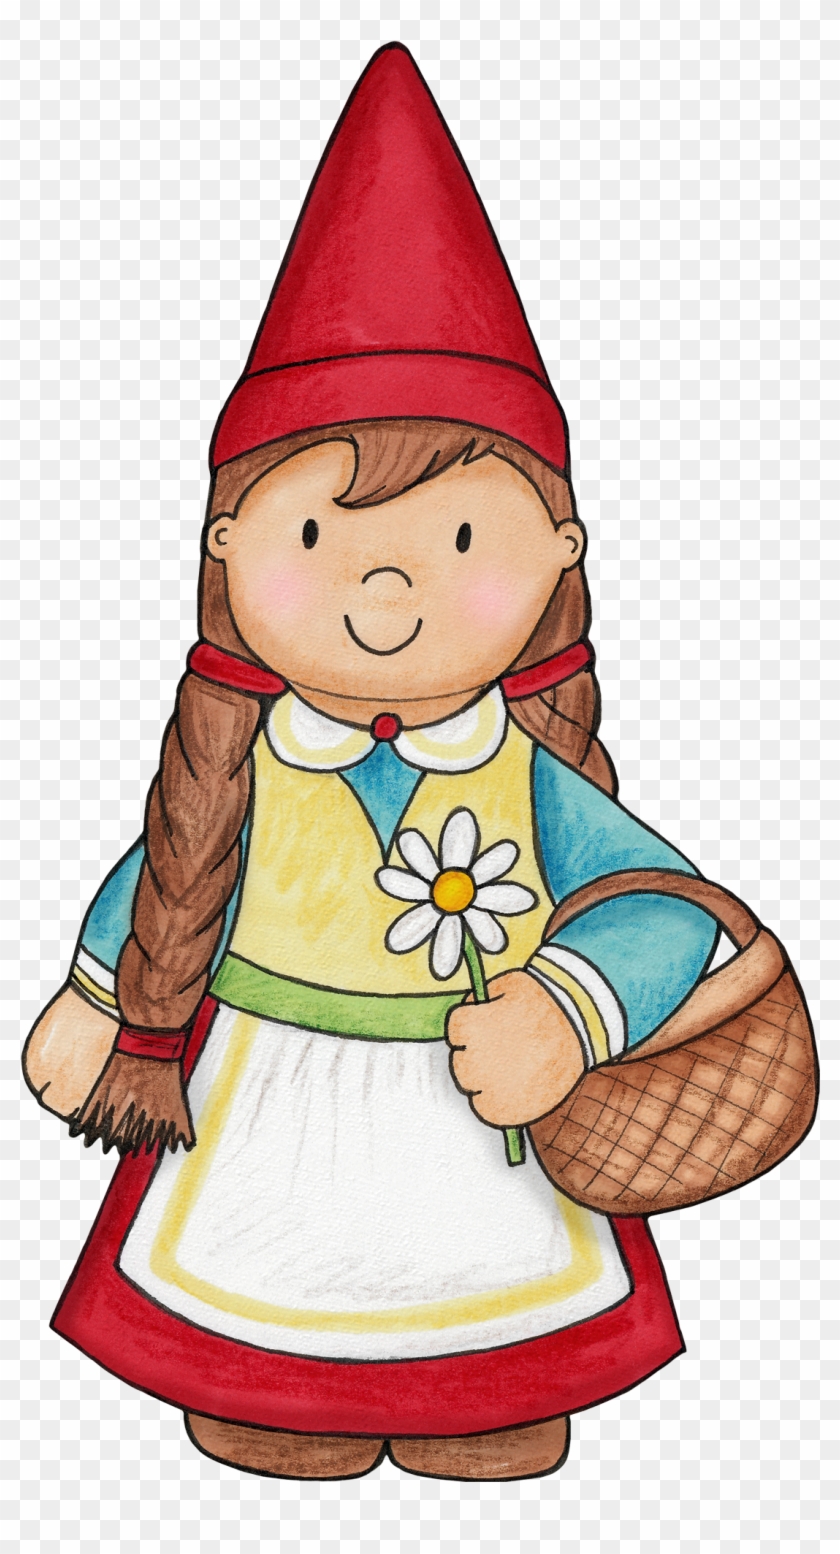 Little Girl Gnome For A Woodlands Party - Girl Gnome Clipart #817700